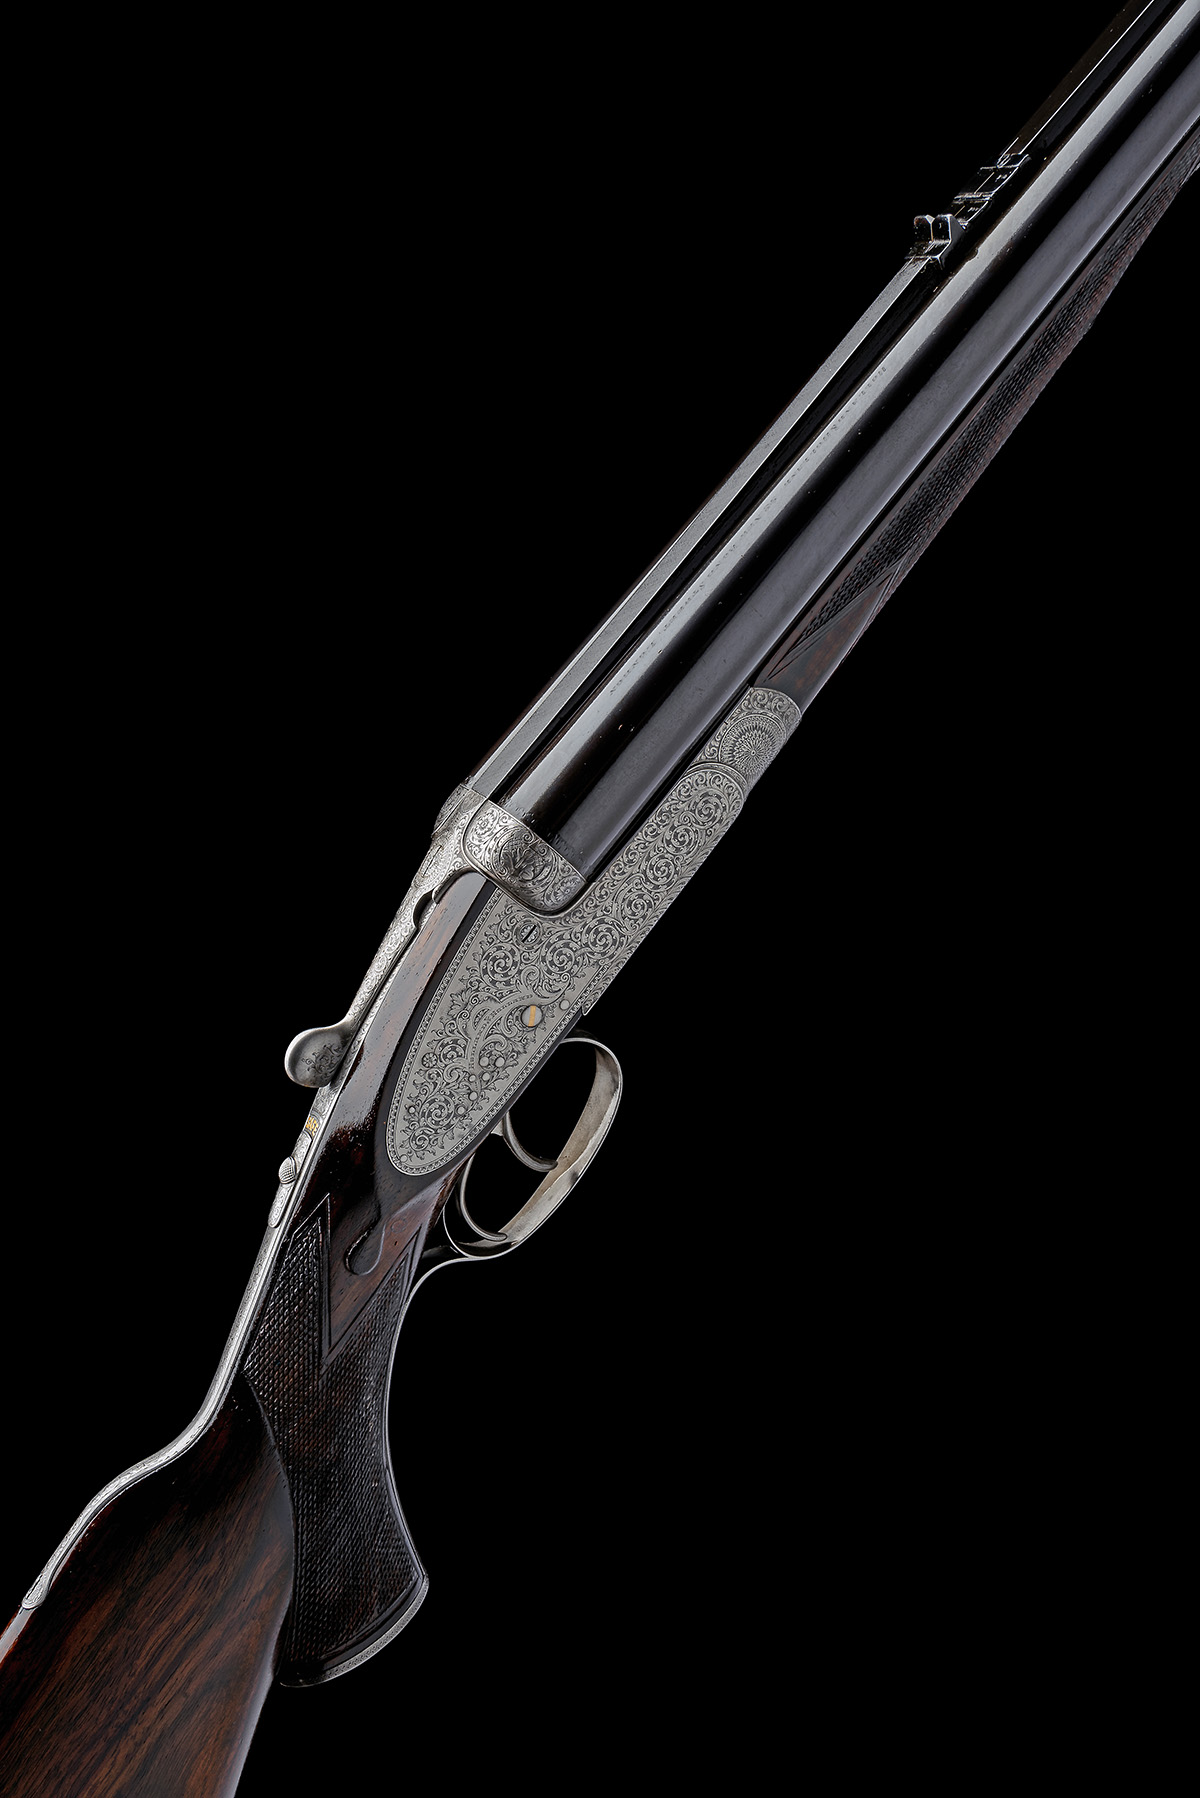 HOLLAND & HOLLAND A .577 (3IN.) BLACK POWDER EXPRESS 'ROYAL' SIDELOCK NON-EJECTOR DOUBLE RIFLE,